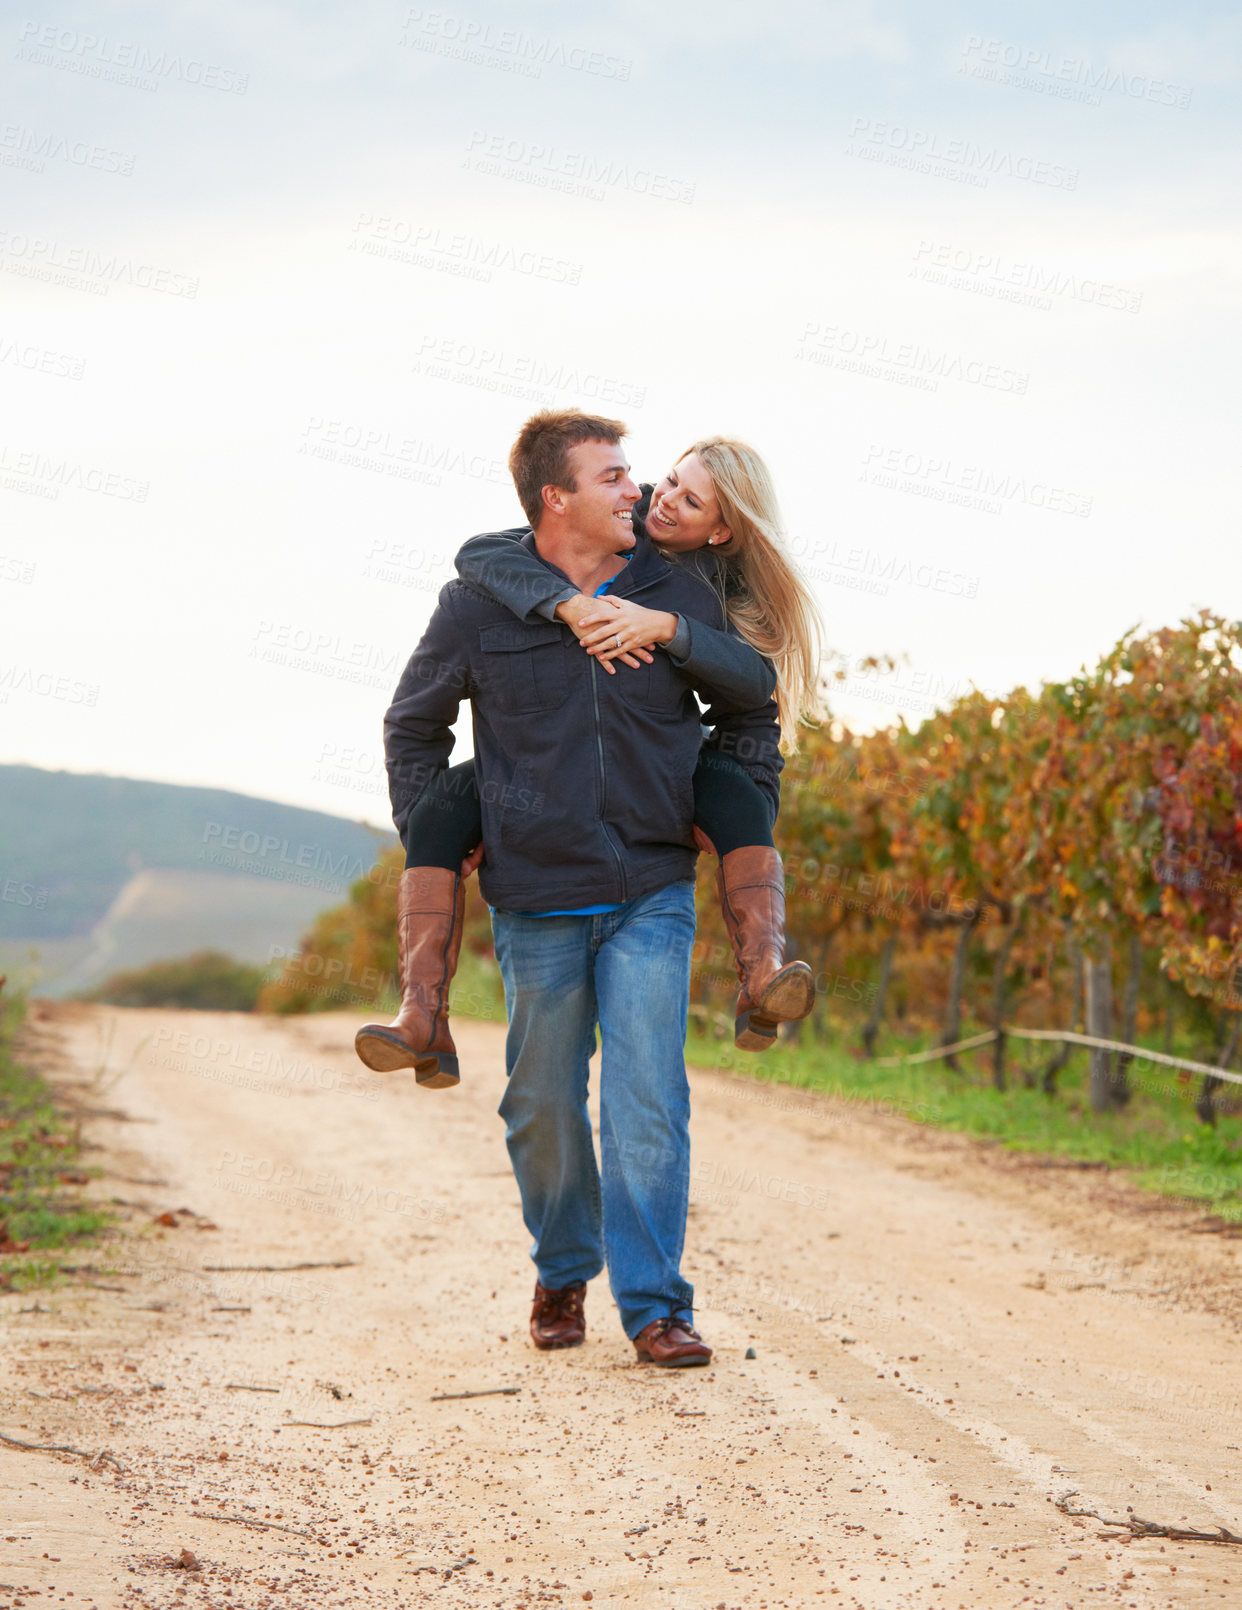 Buy stock photo A young man carrying his girlfriend on his back while taking a walk on a vineyard